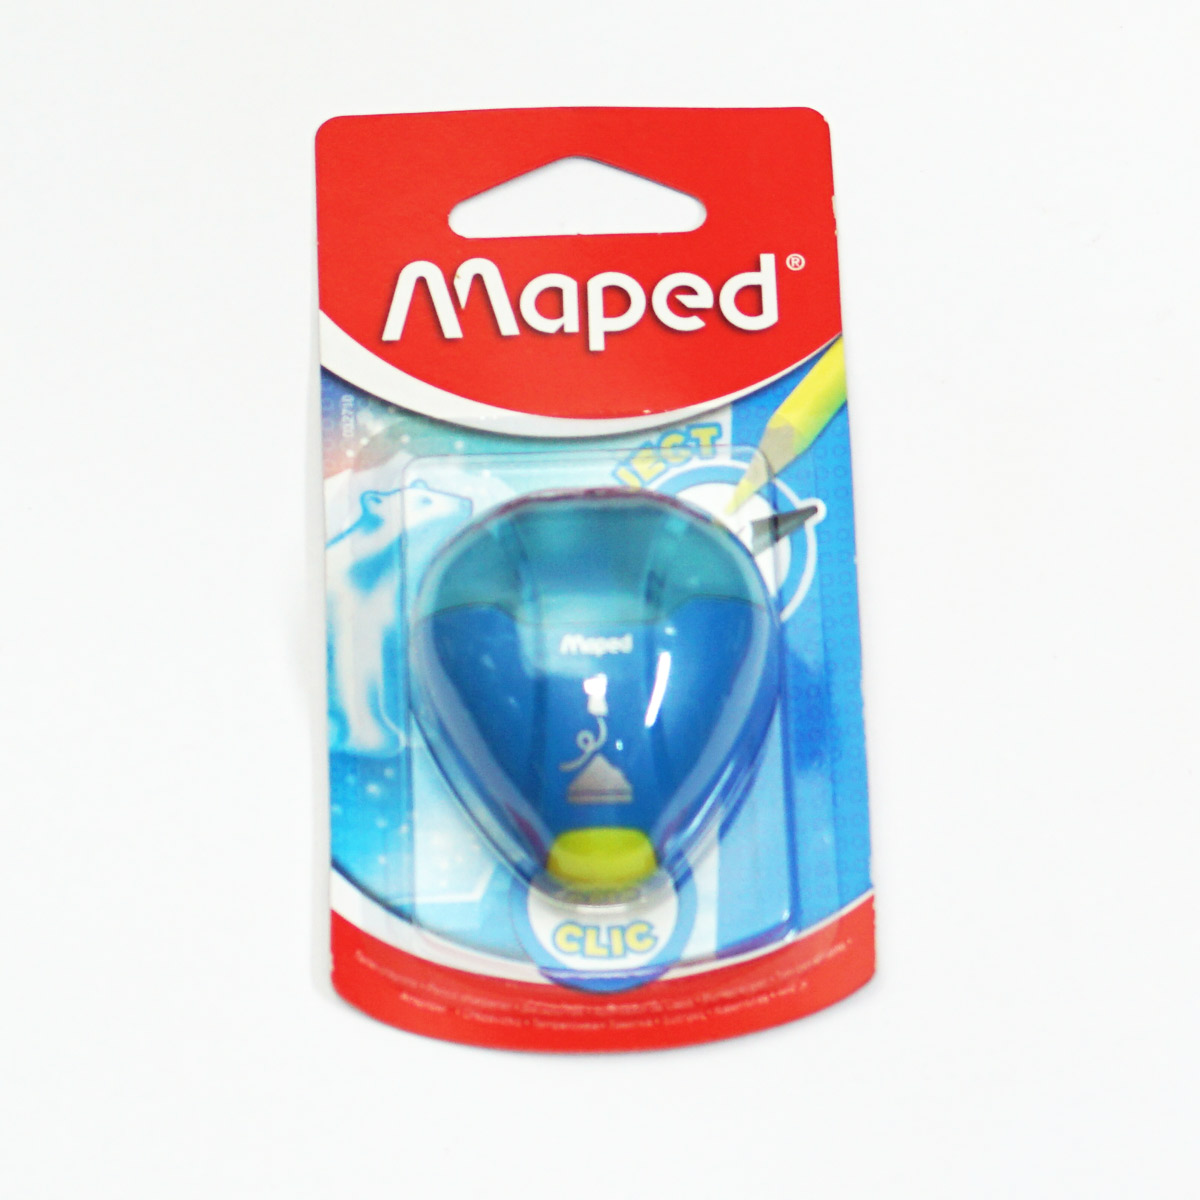 Maped 032710 Igloo Eject Green Color one Hole Pencil Sharpener SKU 50121